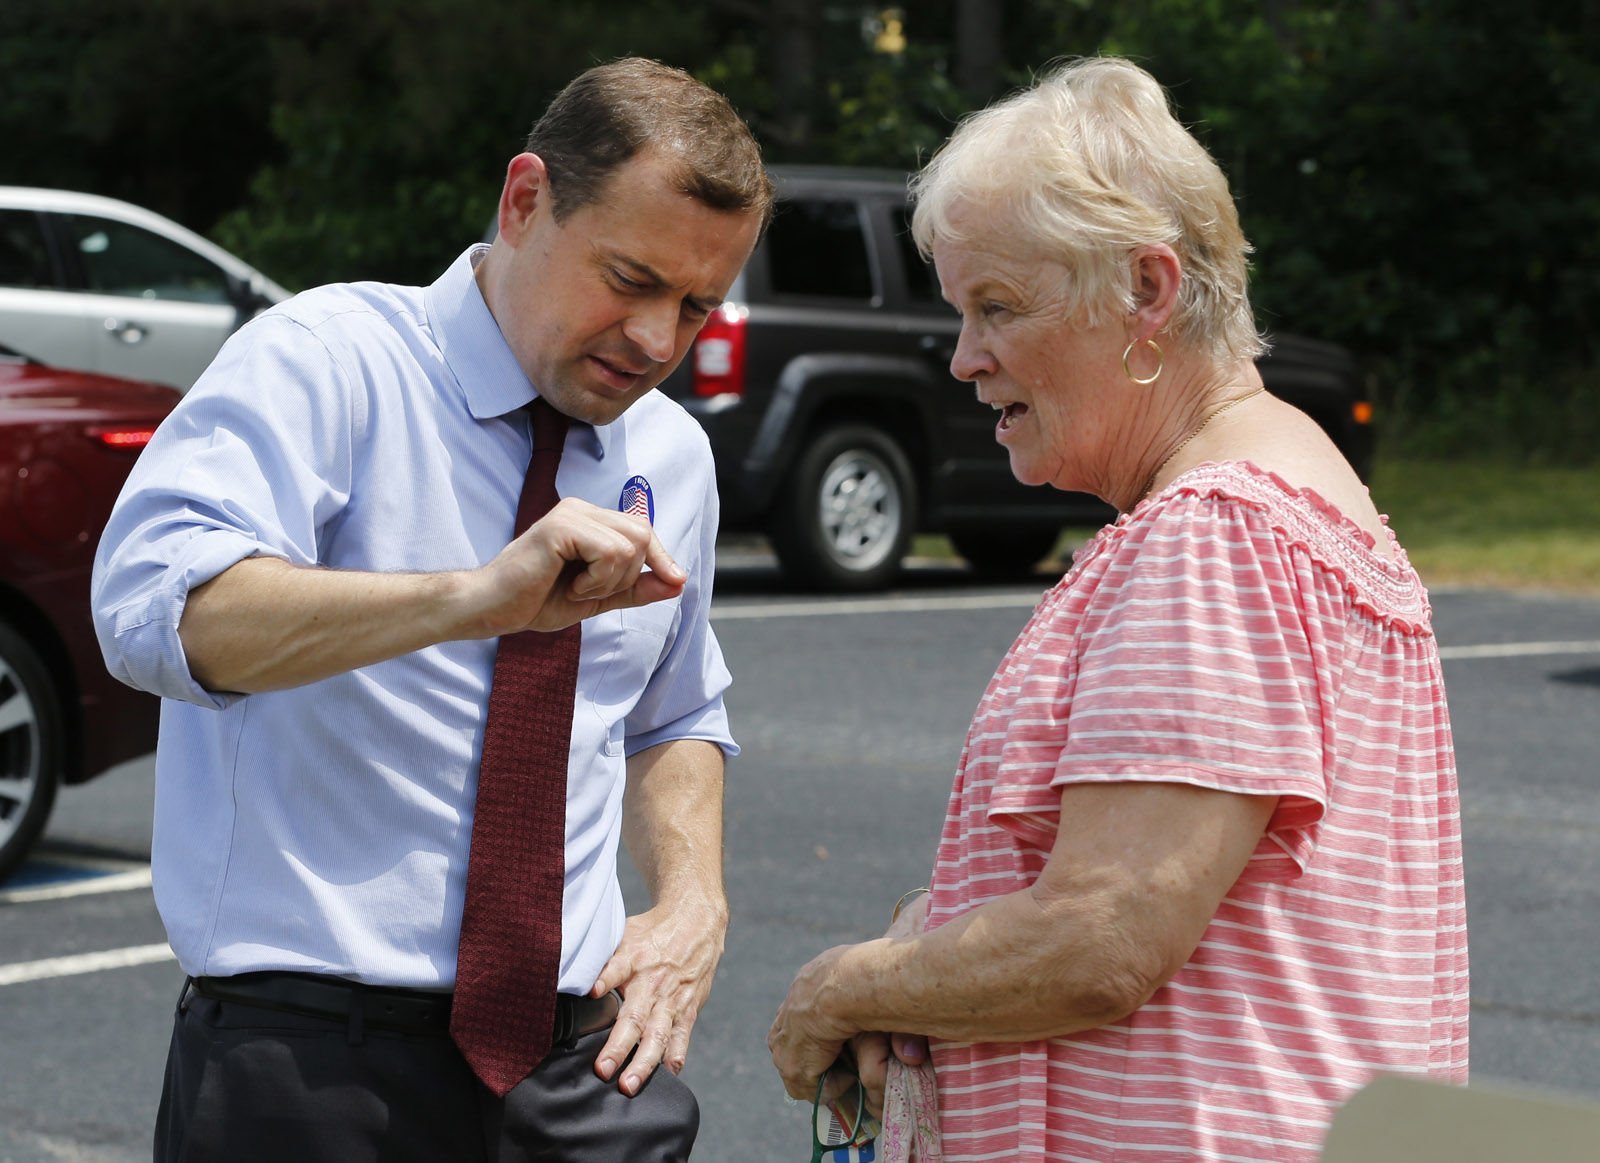 Democratic candidate for governor, former congressman, Tom Perriello, left, talks with Gretchen Craig of Chesterfield, outside a polling place Tuesday, June 13, 2017, in North Chesterfield, Va. Perriello faces Lt. Gov Ralph Northam faces in today's primary. (AP Photo/Steve Helber)